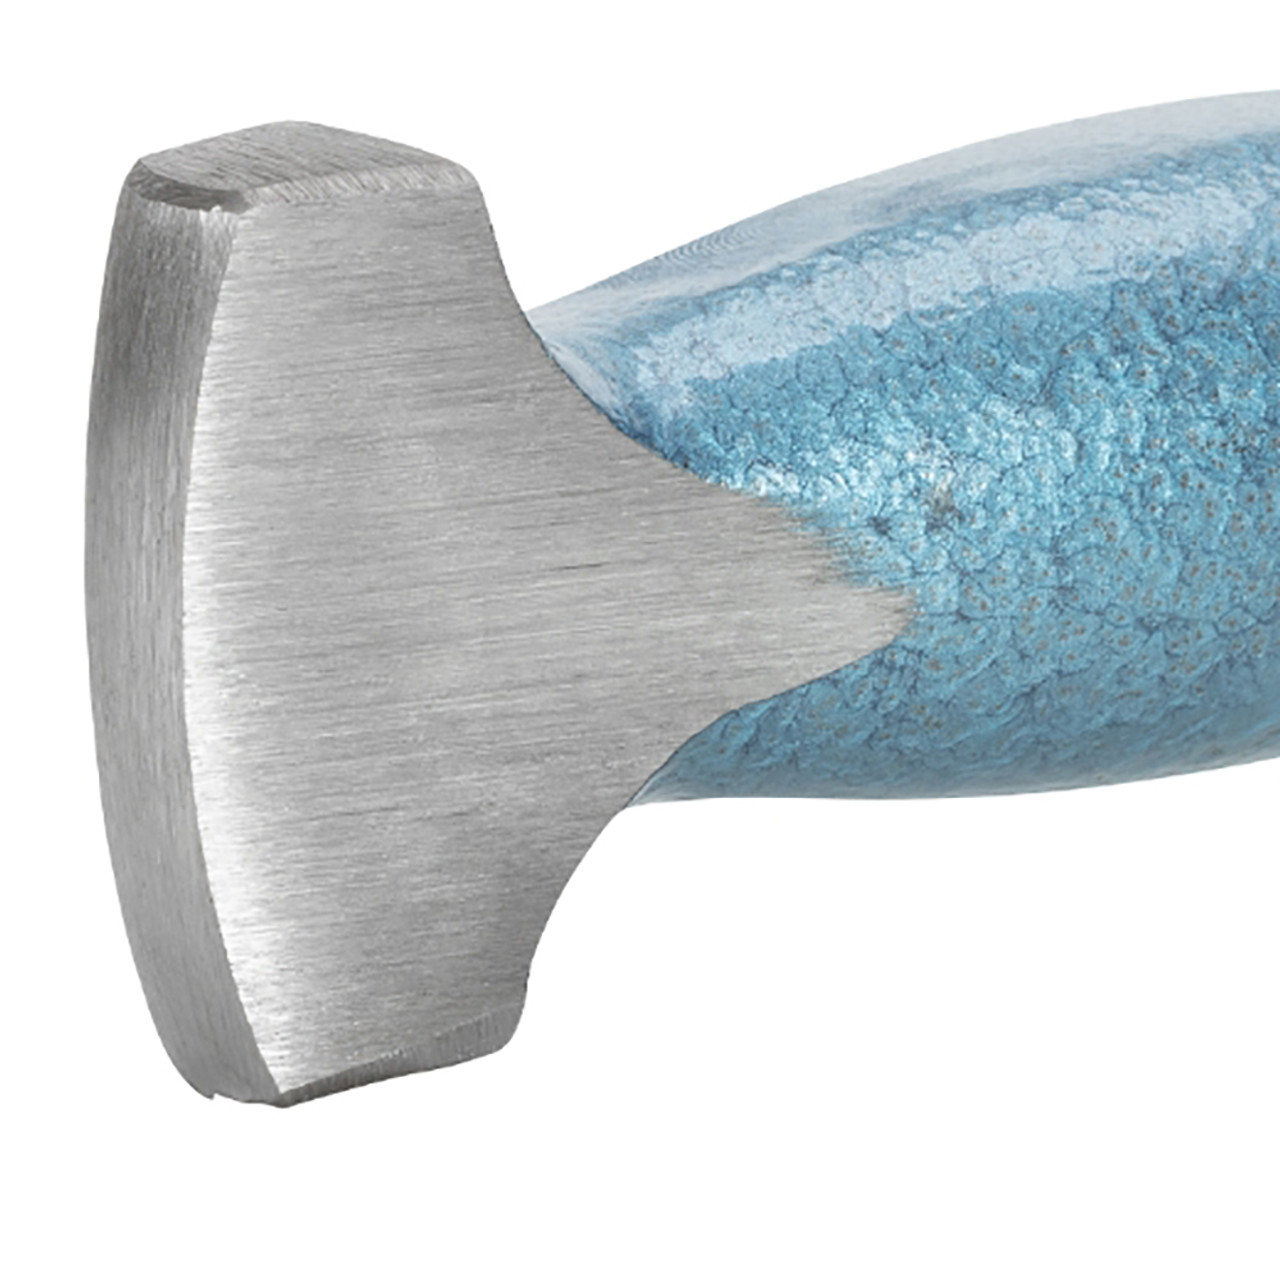 Picard 17oz Autobody hammer, double, smooth faces